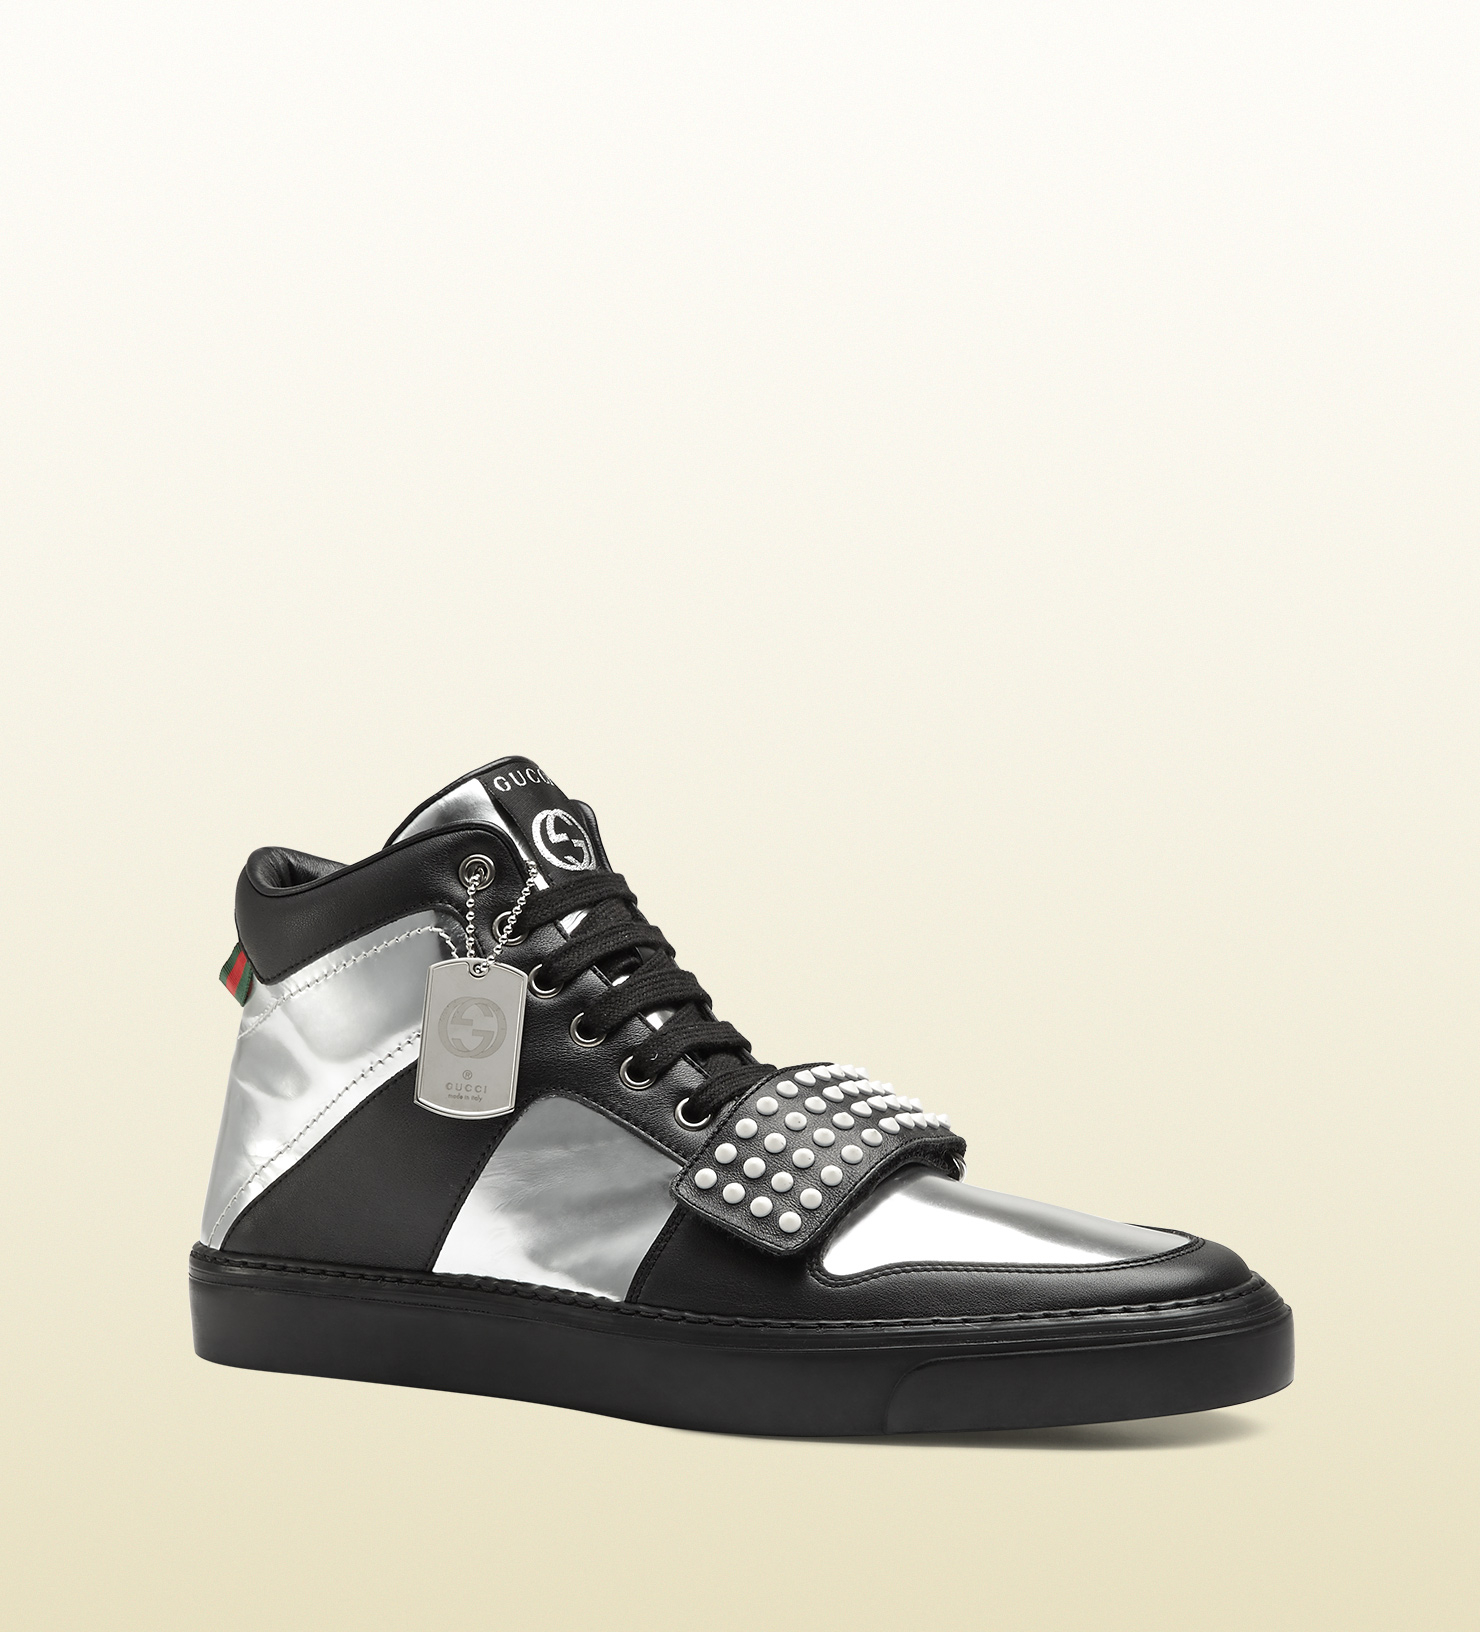 gucci sneakers limited edition